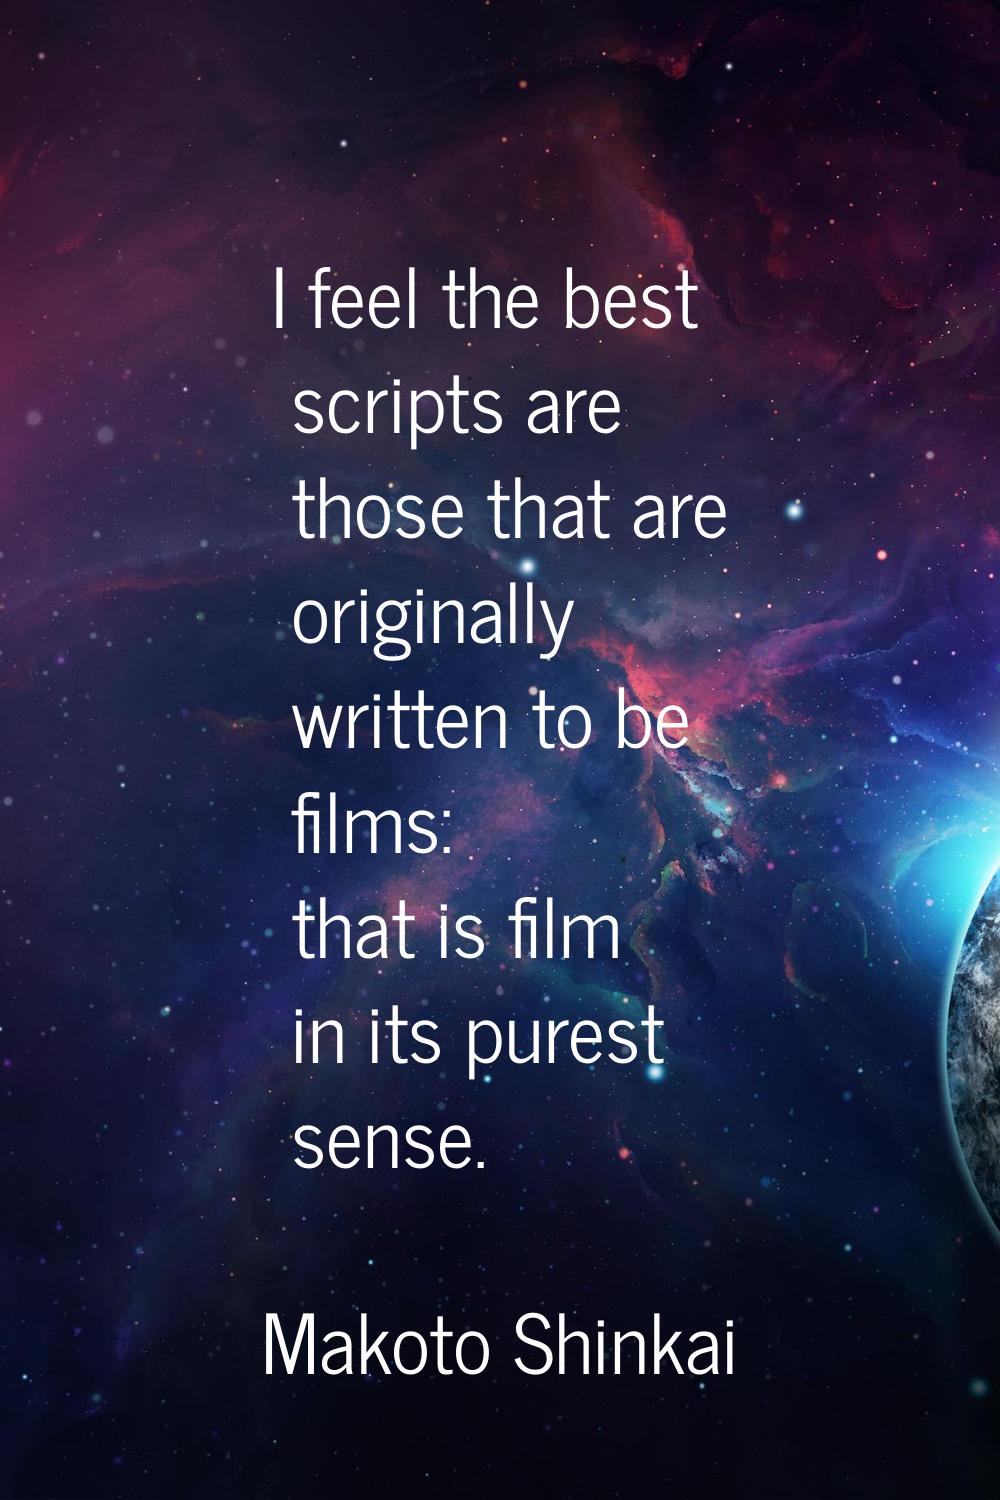 I feel the best scripts are those that are originally written to be films: that is film in its pure